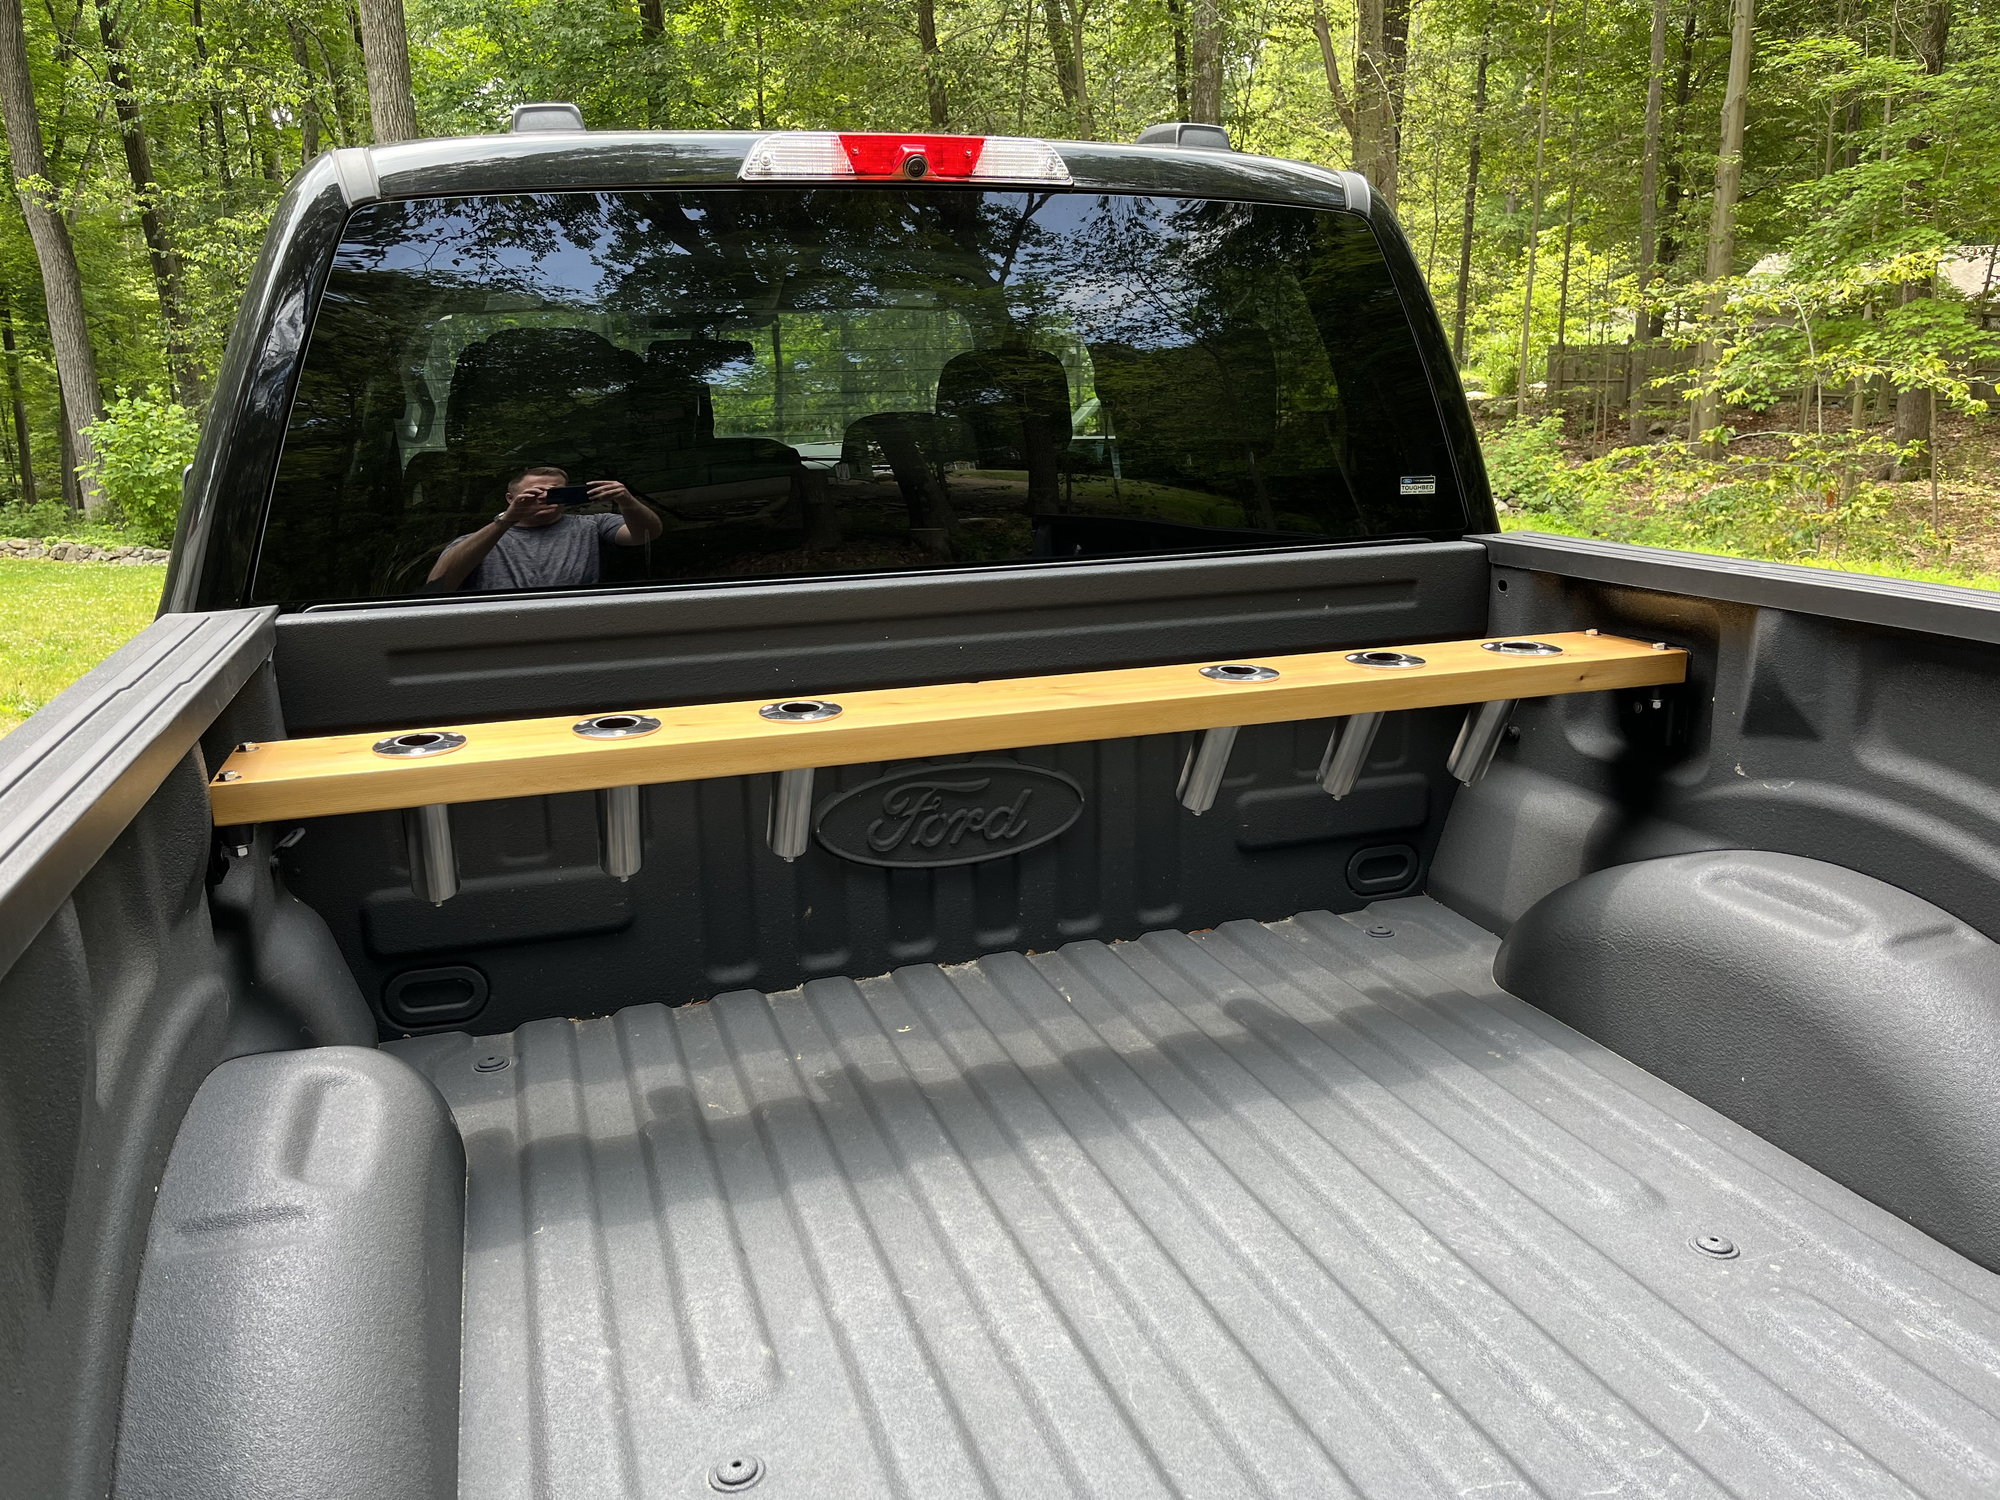 Fishing rod rack - hitch mounted cargo basket - The Hull Truth - Boating  and Fishing Forum